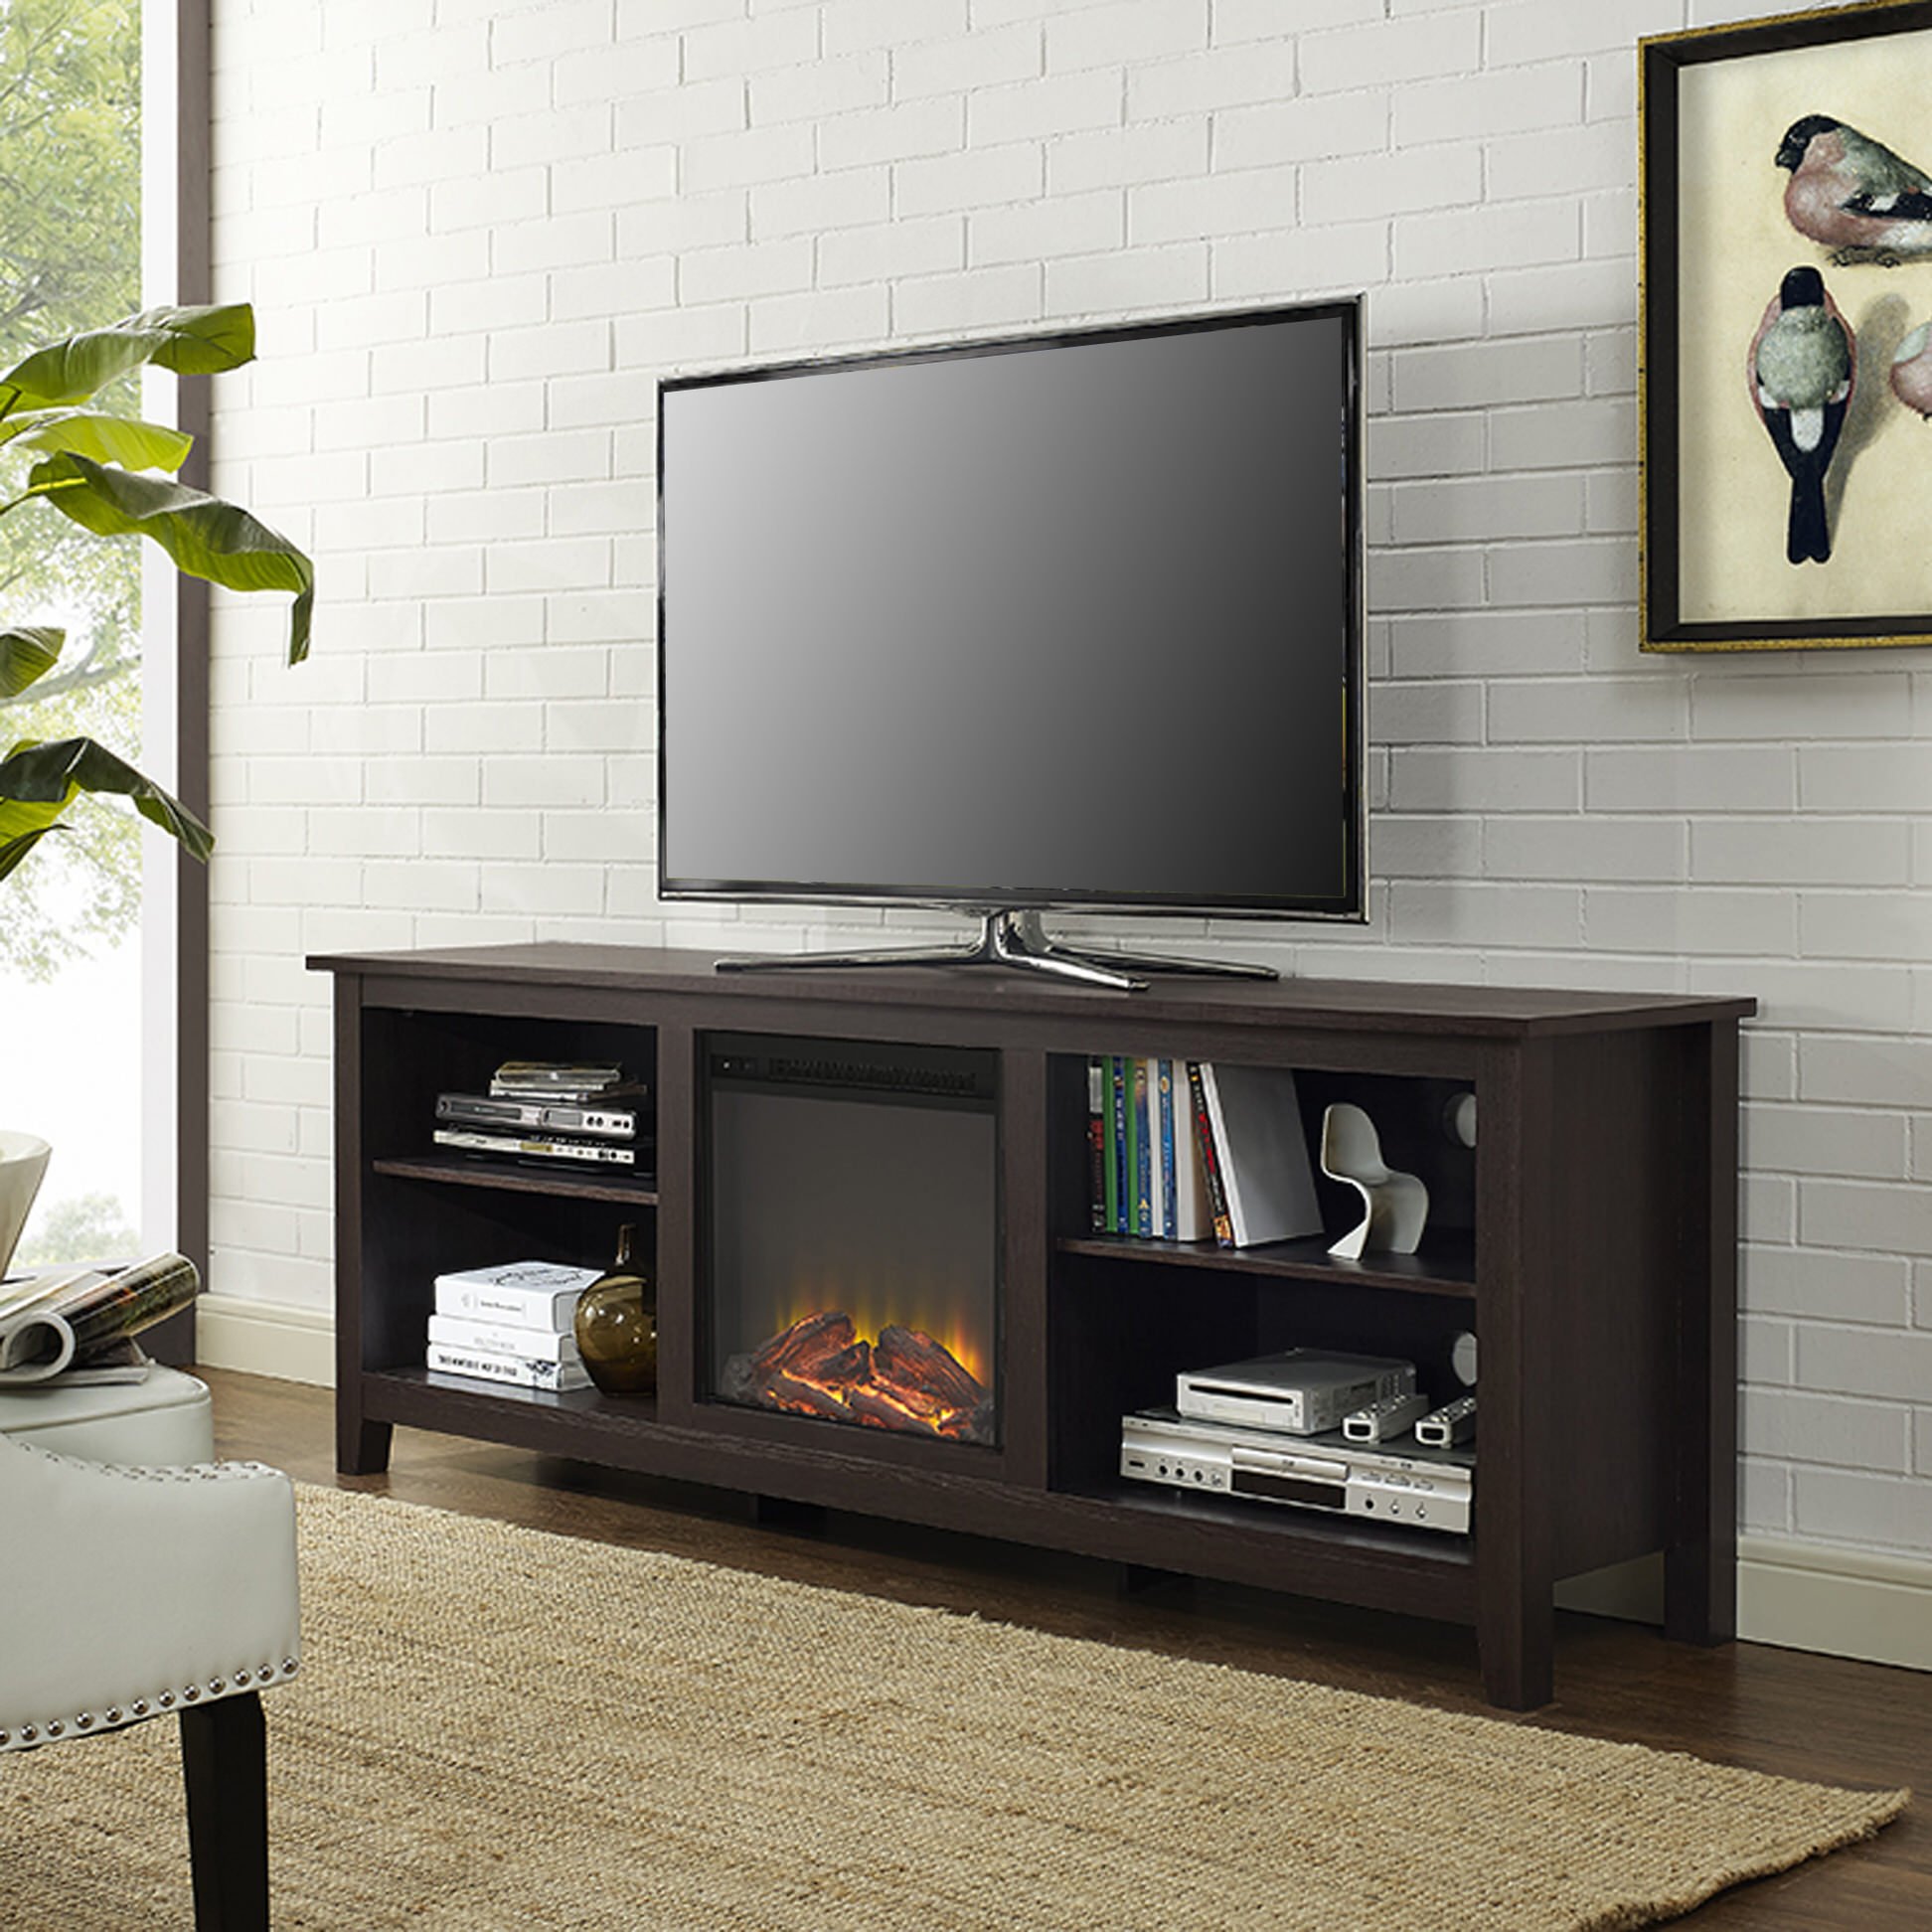 Essential 70 Inch Fireplace TV Console - Espresso by Walker Edison